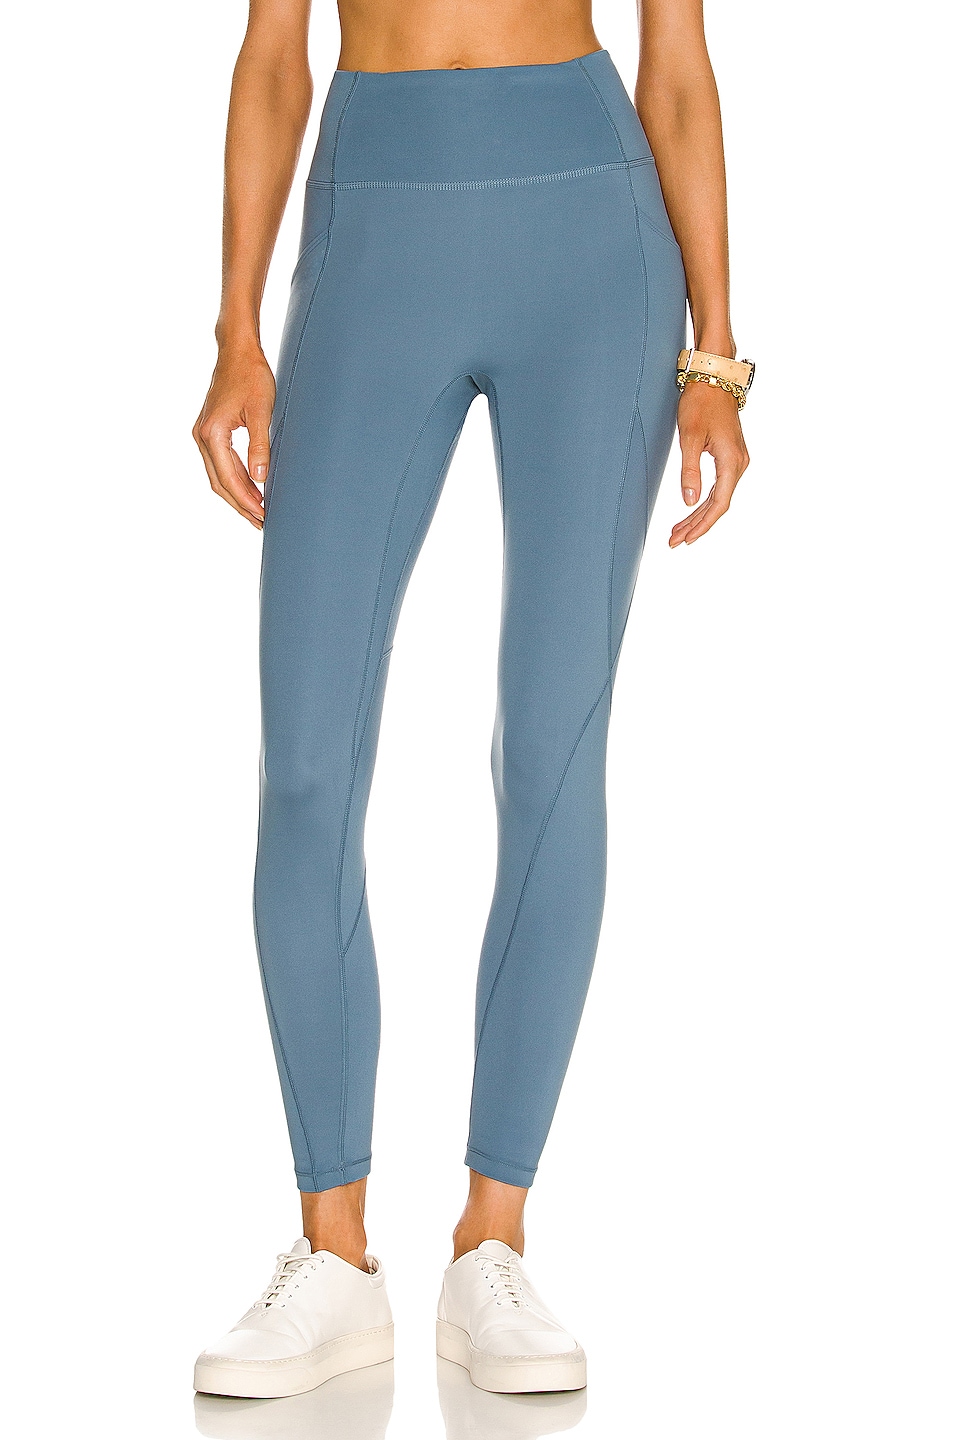 Image 1 of Le Ore Lucca High Rise Pocket Legging in Stellar Blue